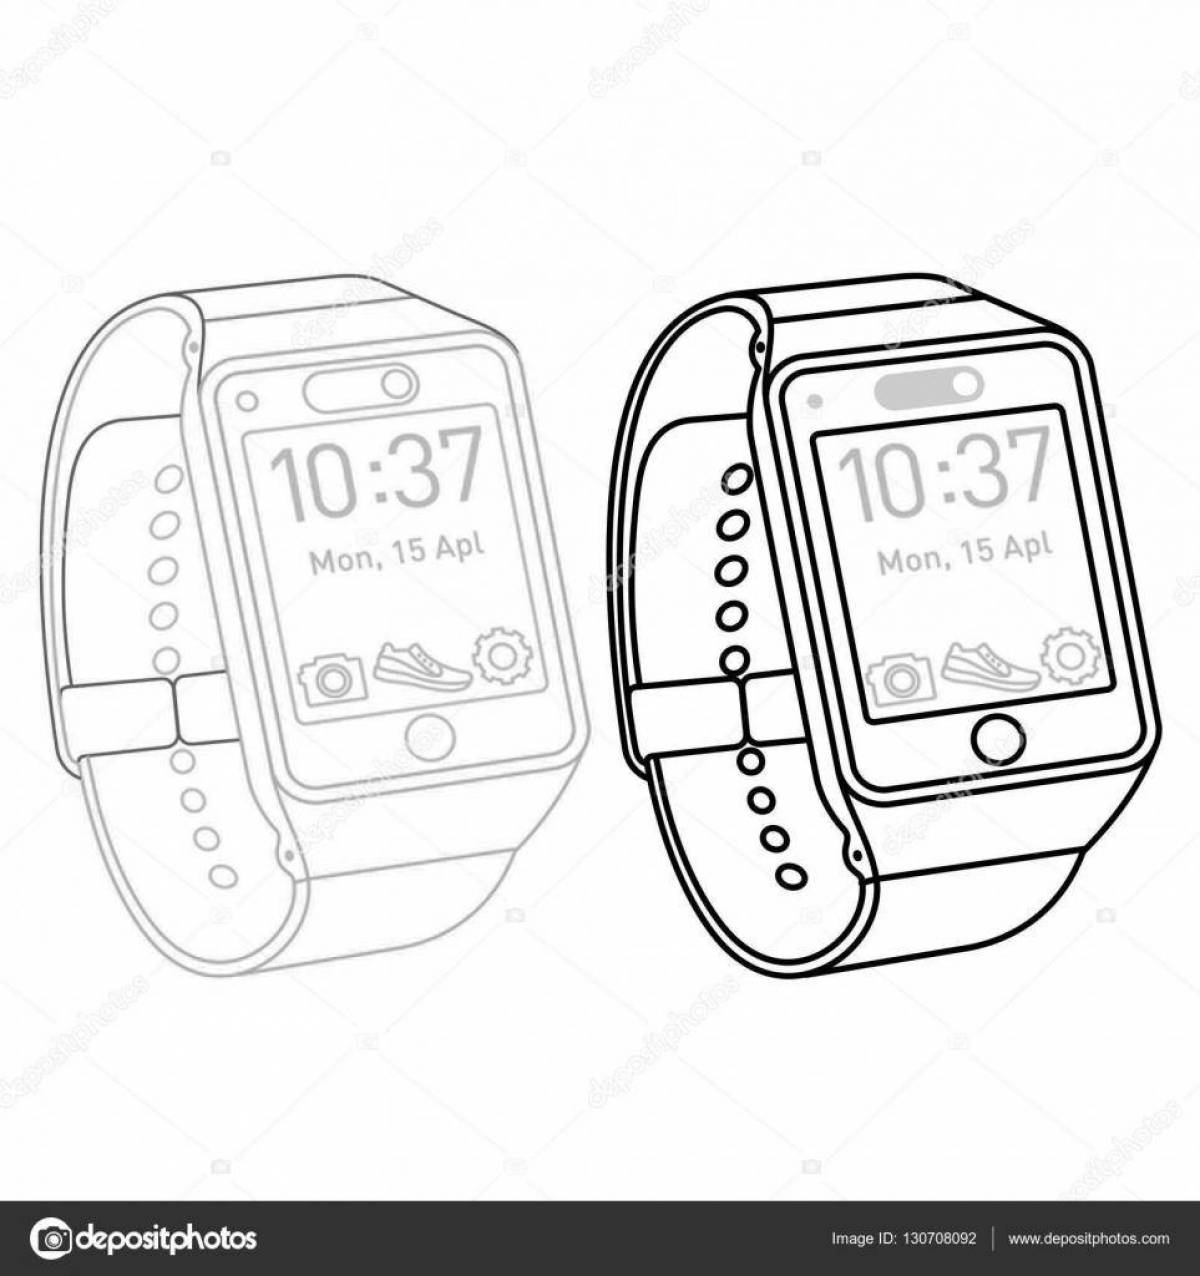 Shiny smartwatch coloring page